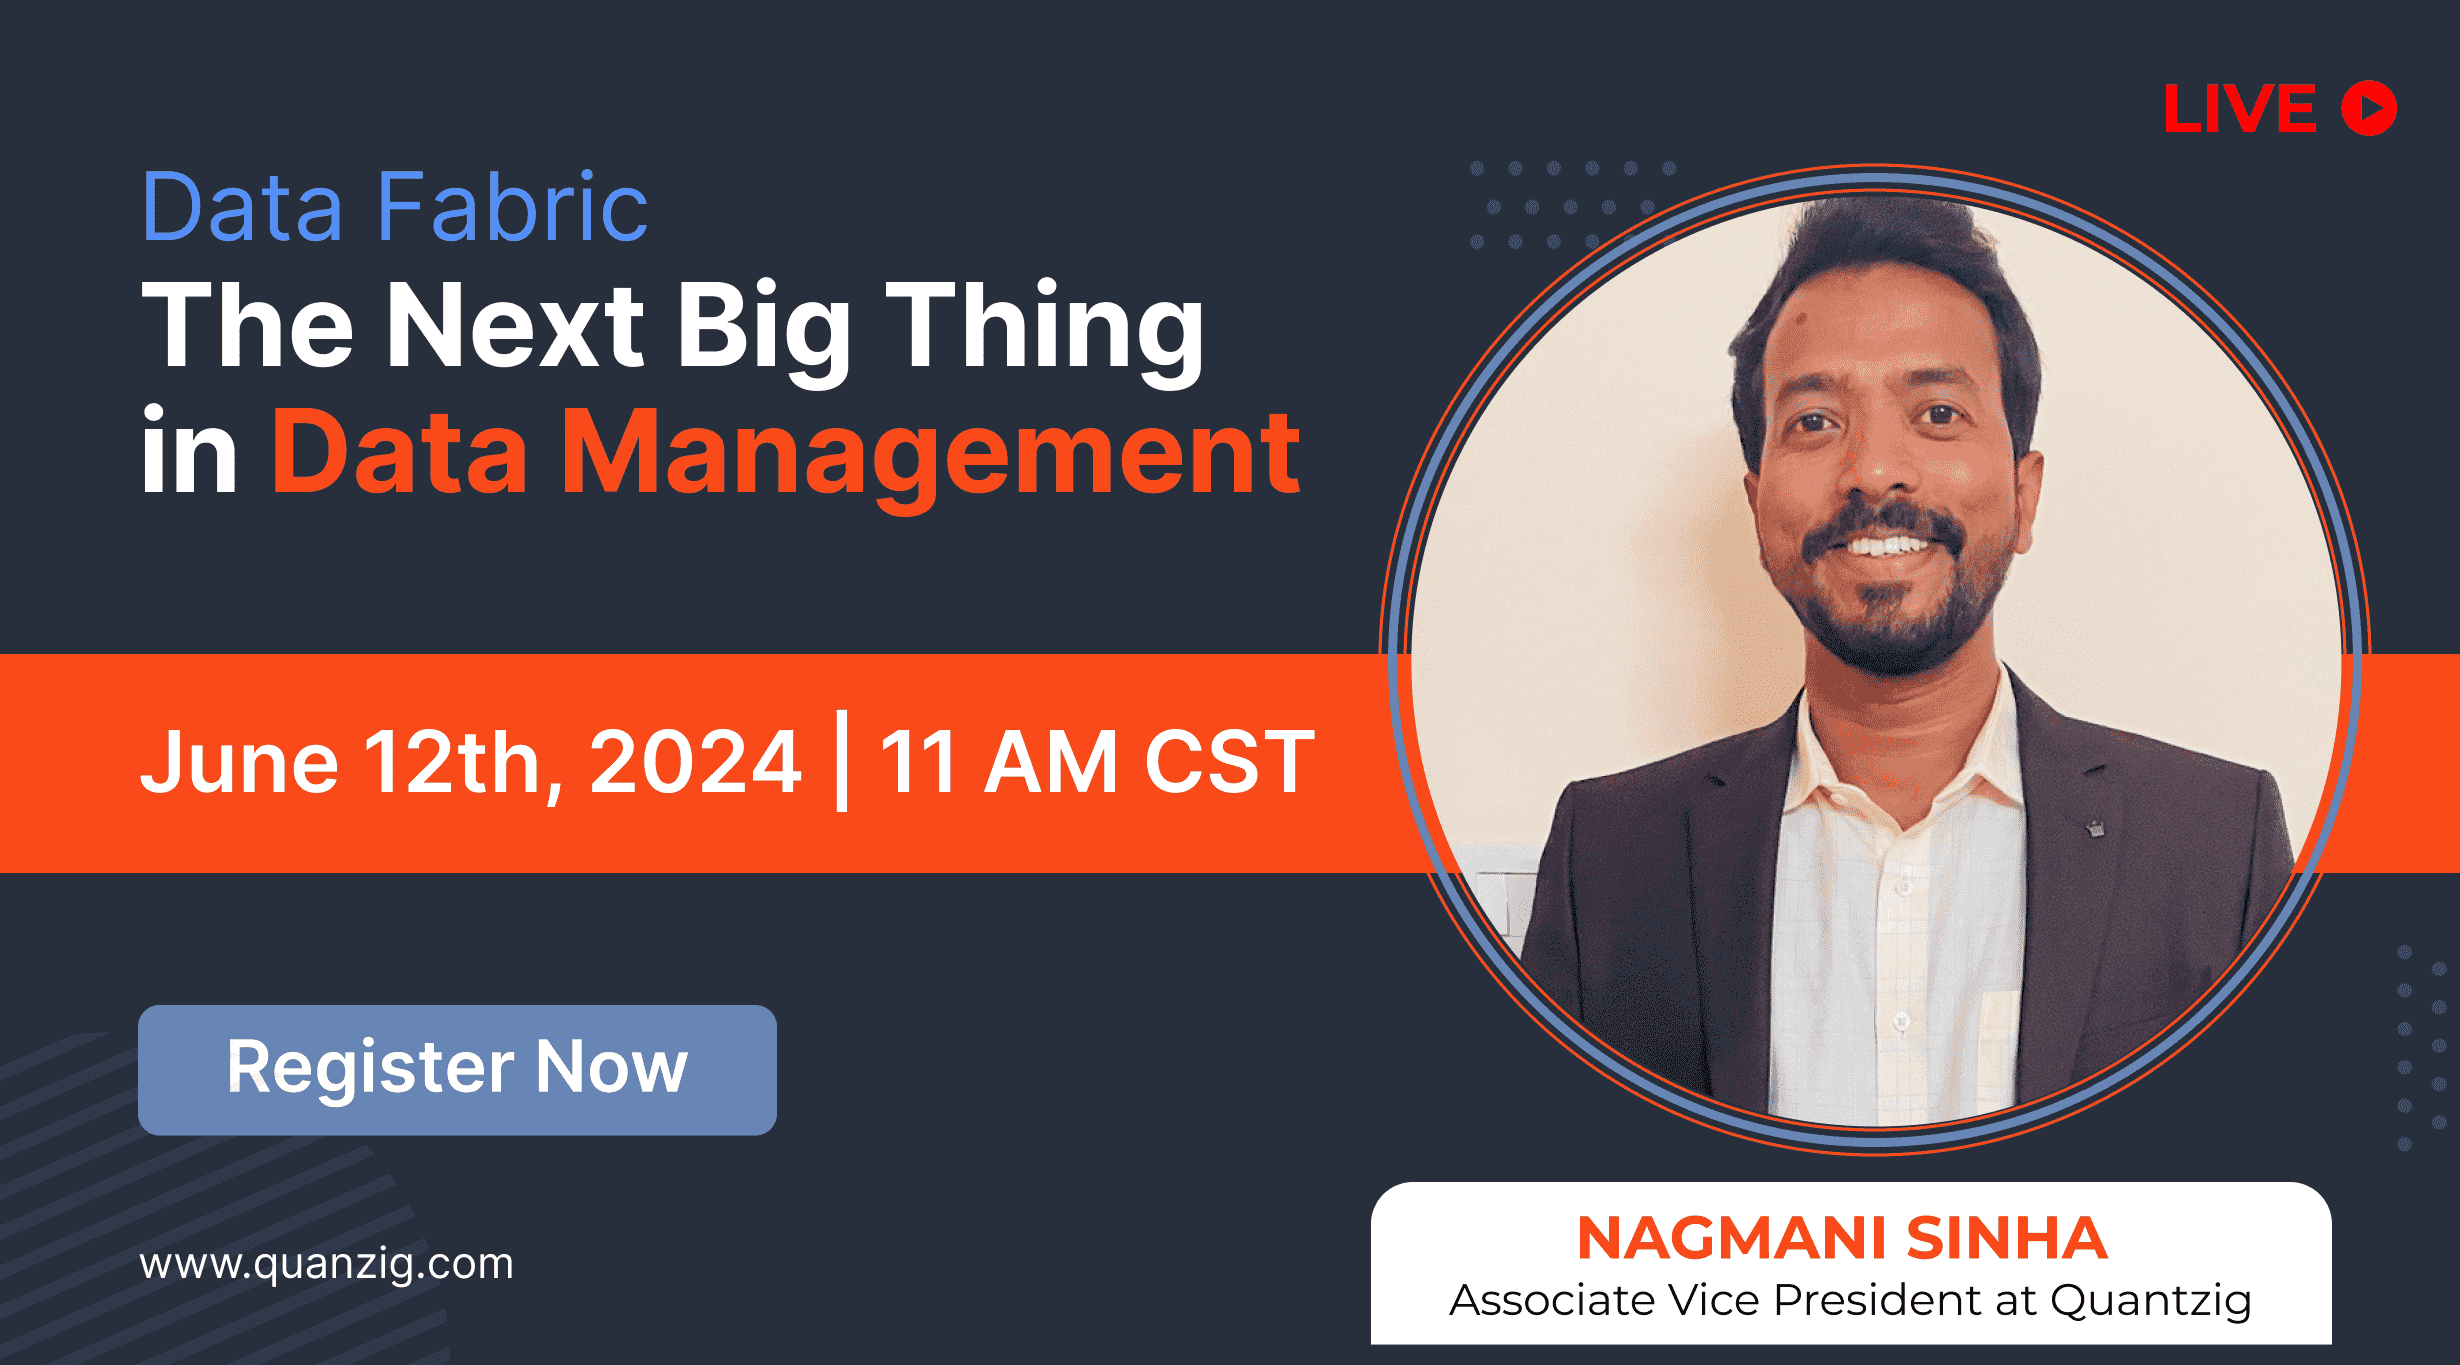 [Upcoming Webinar] Data Fabric: The Next Big Thing in Data Management 